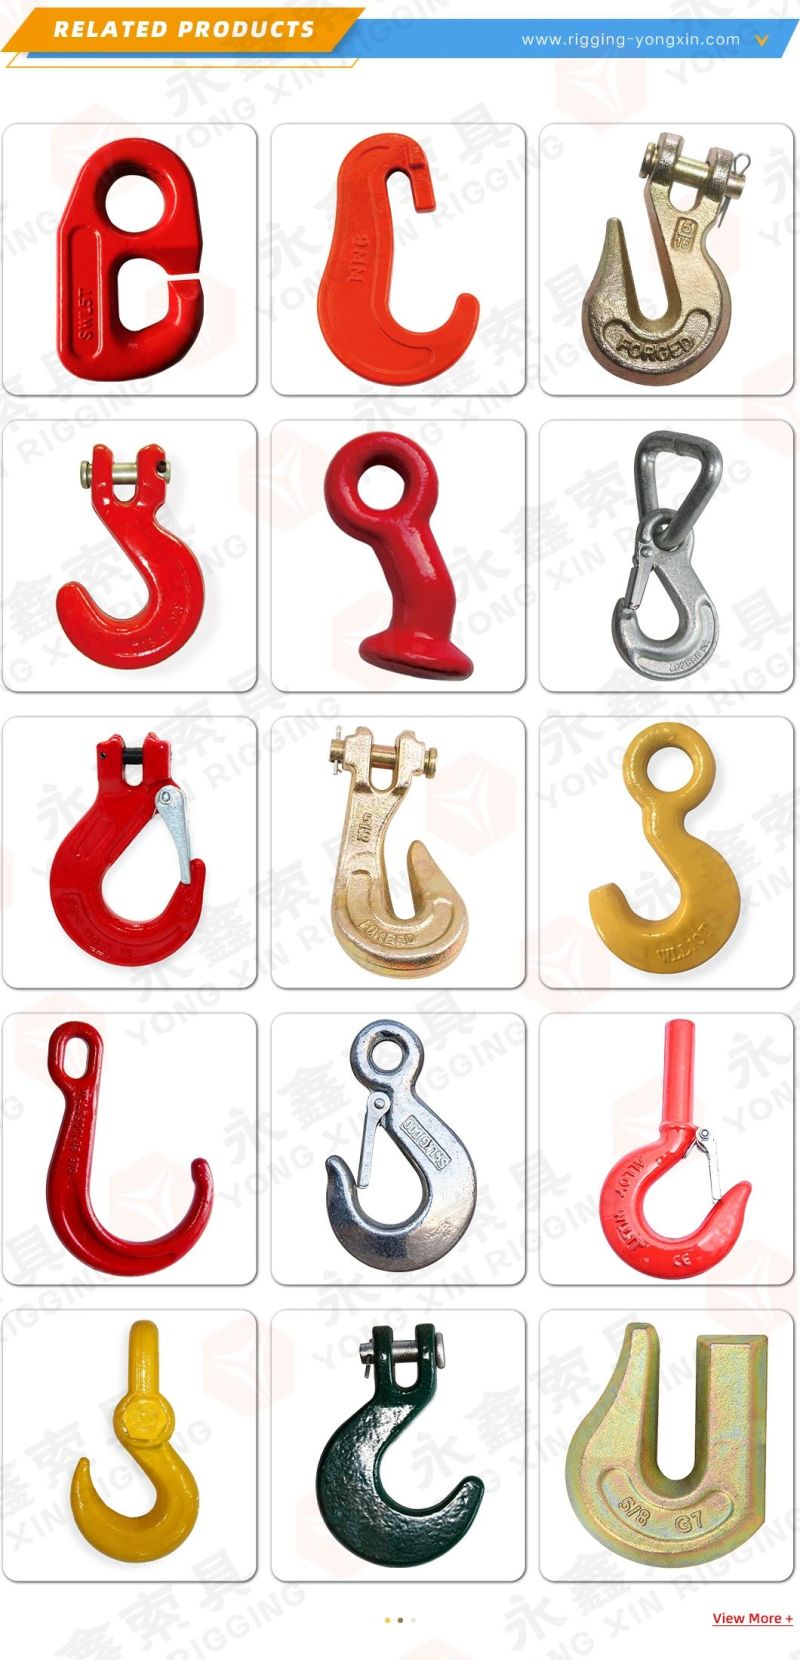 Chain Hoist Safety Hook Drop Forged Lifting Eye Hook with Latch H-320 Hook